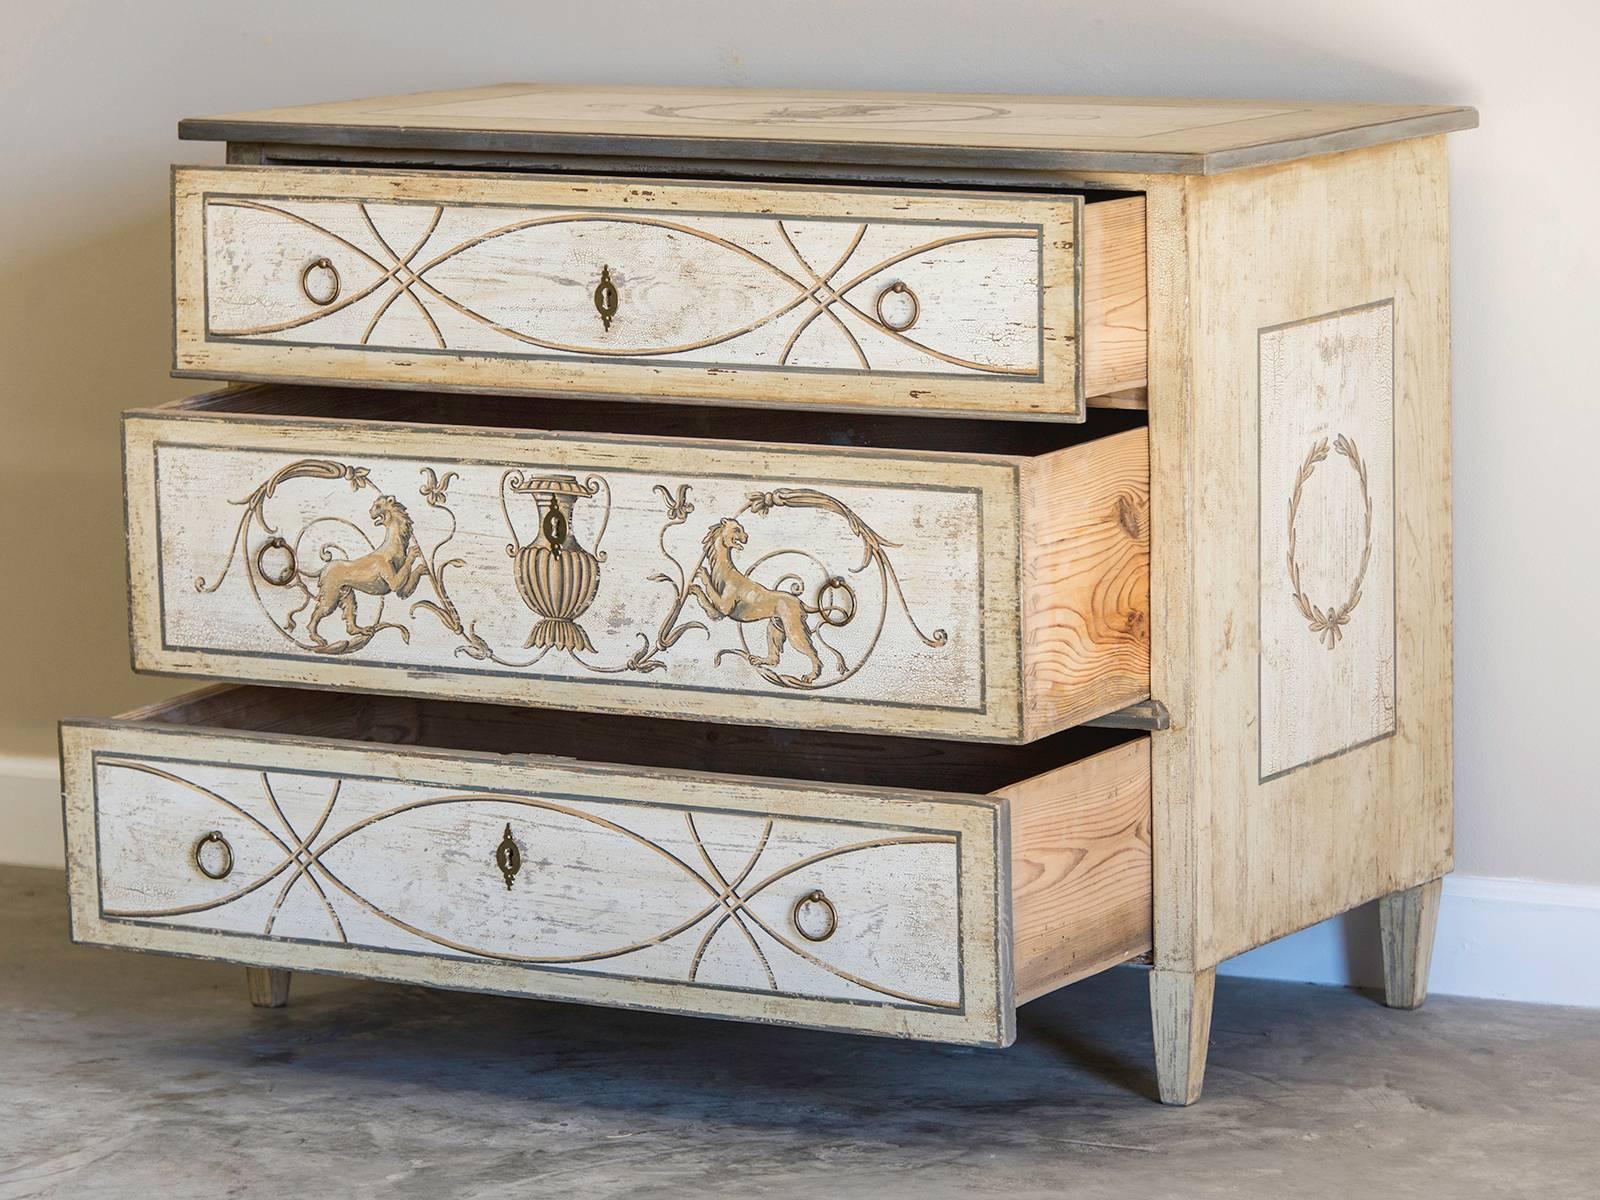 Biedermeier Period Antique German Neoclassical Style Chest of Drawers circa 1830 2